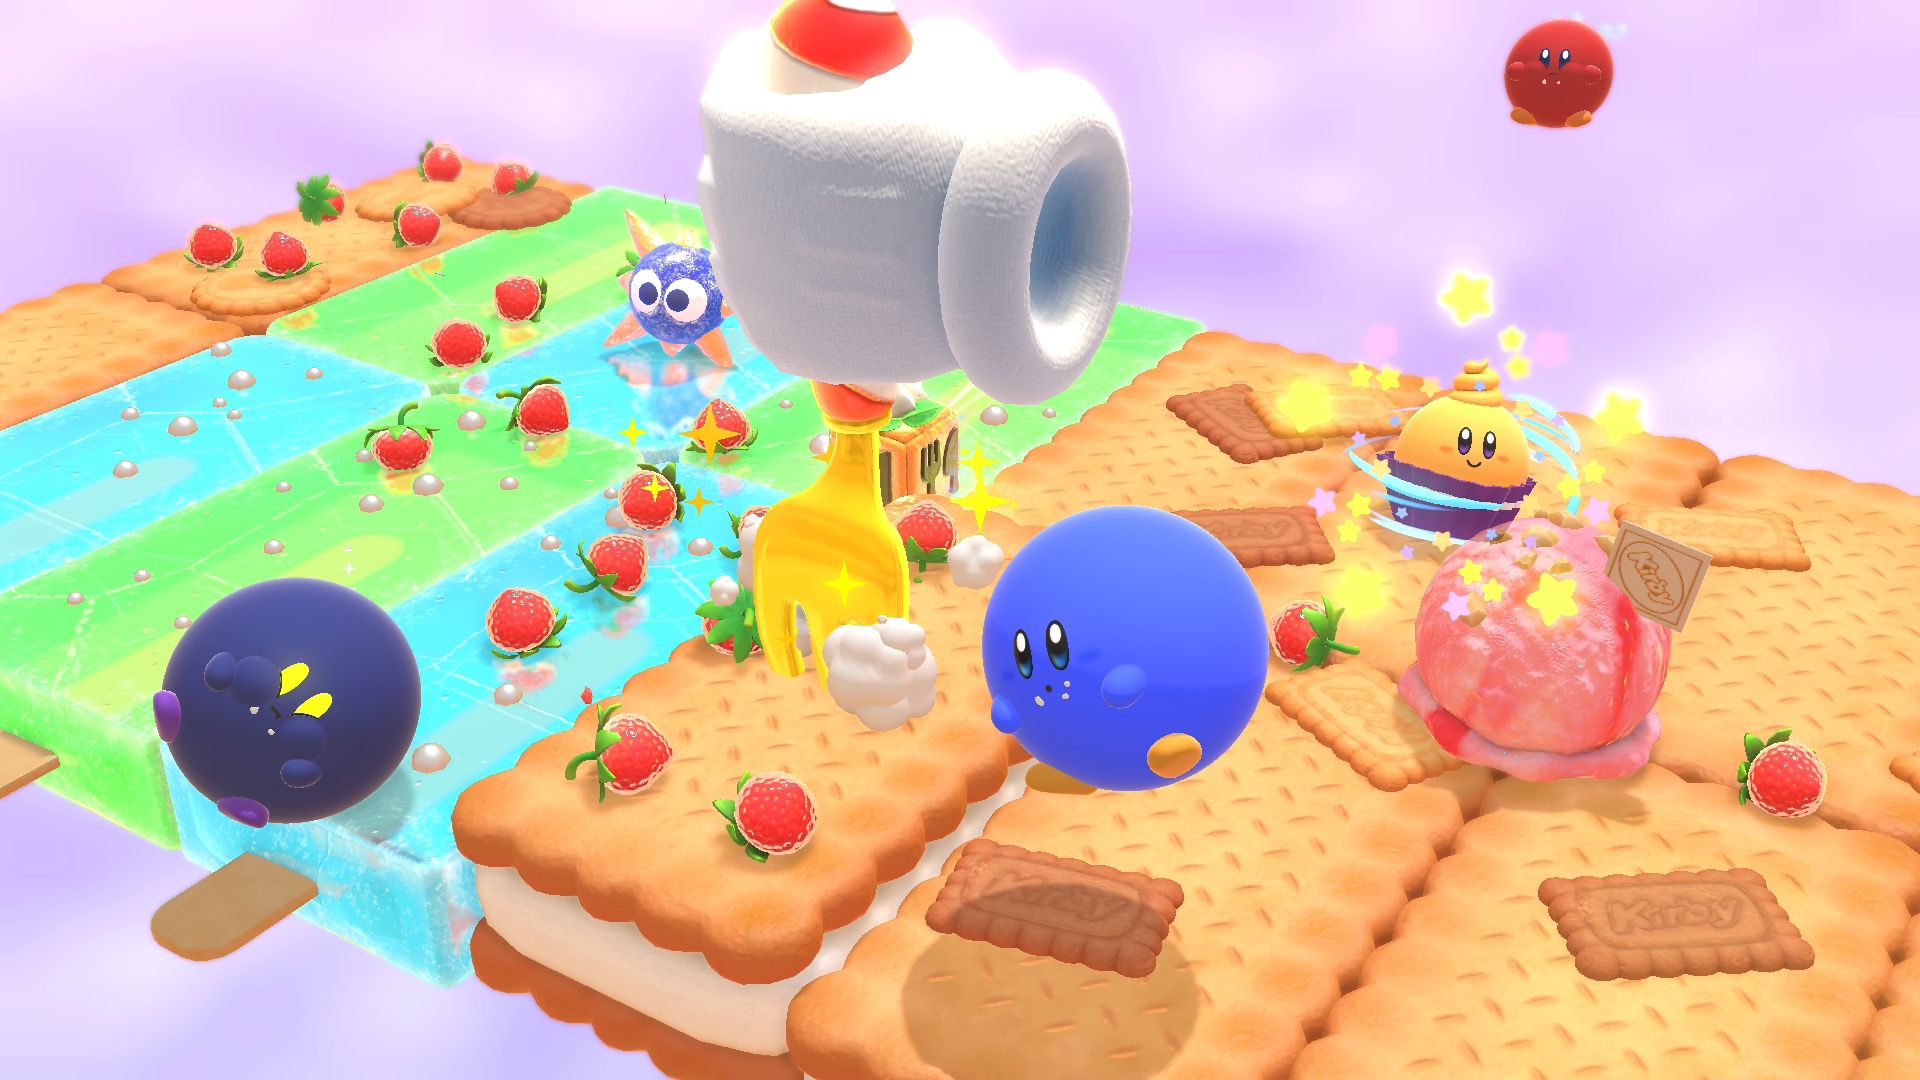 Kirby's Dream Buffet launches August 17